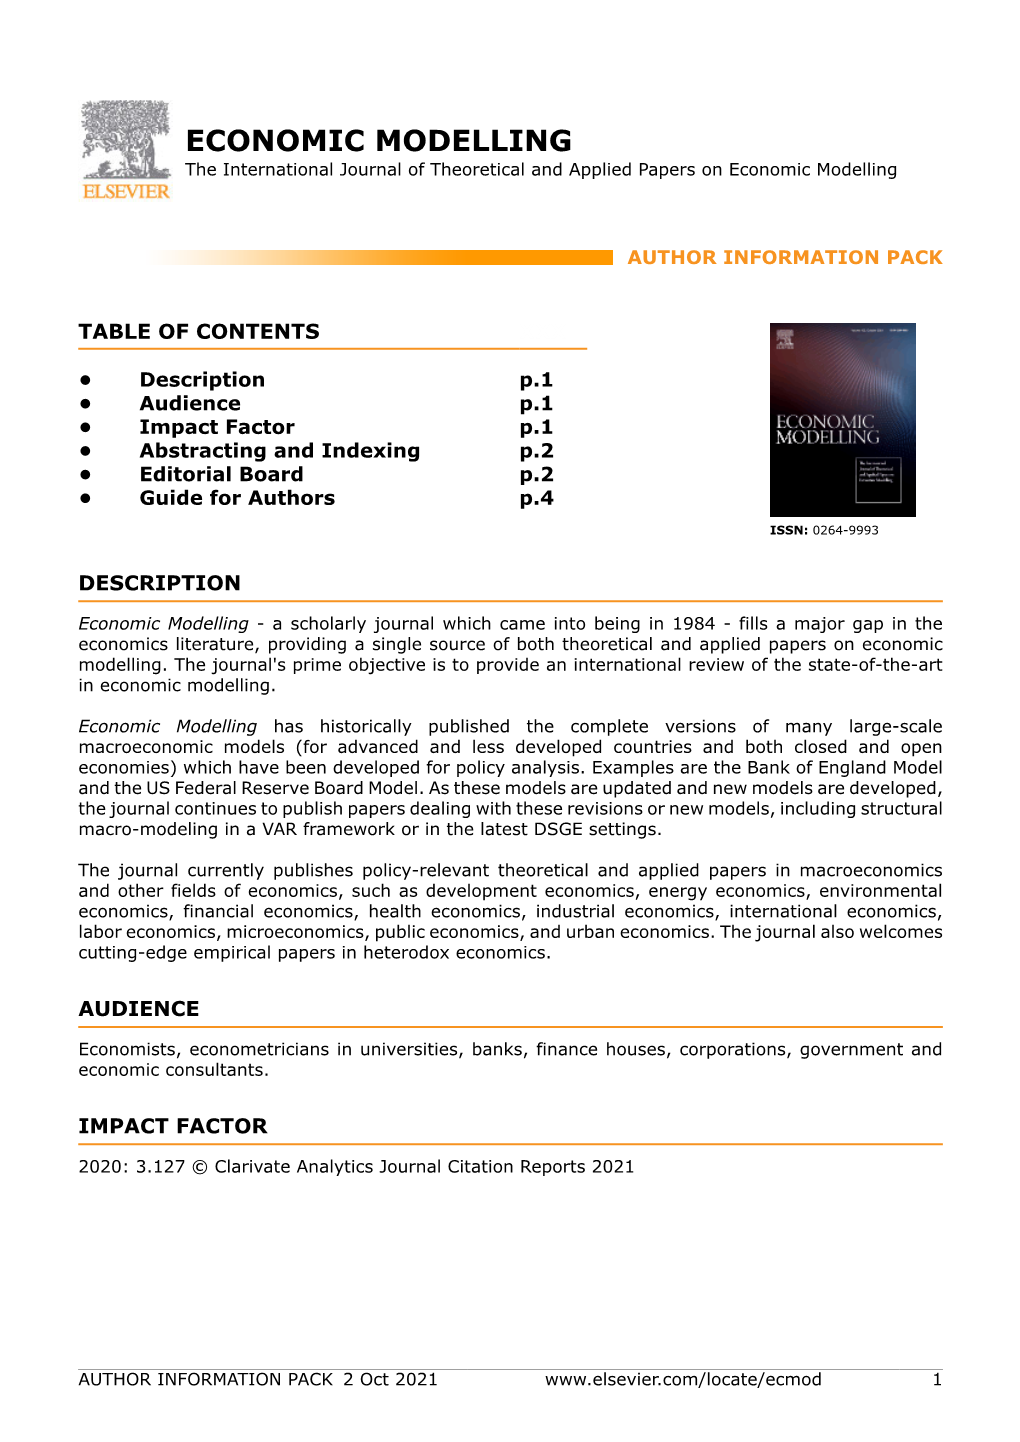 ECONOMIC MODELLING the International Journal of Theoretical and Applied Papers on Economic Modelling